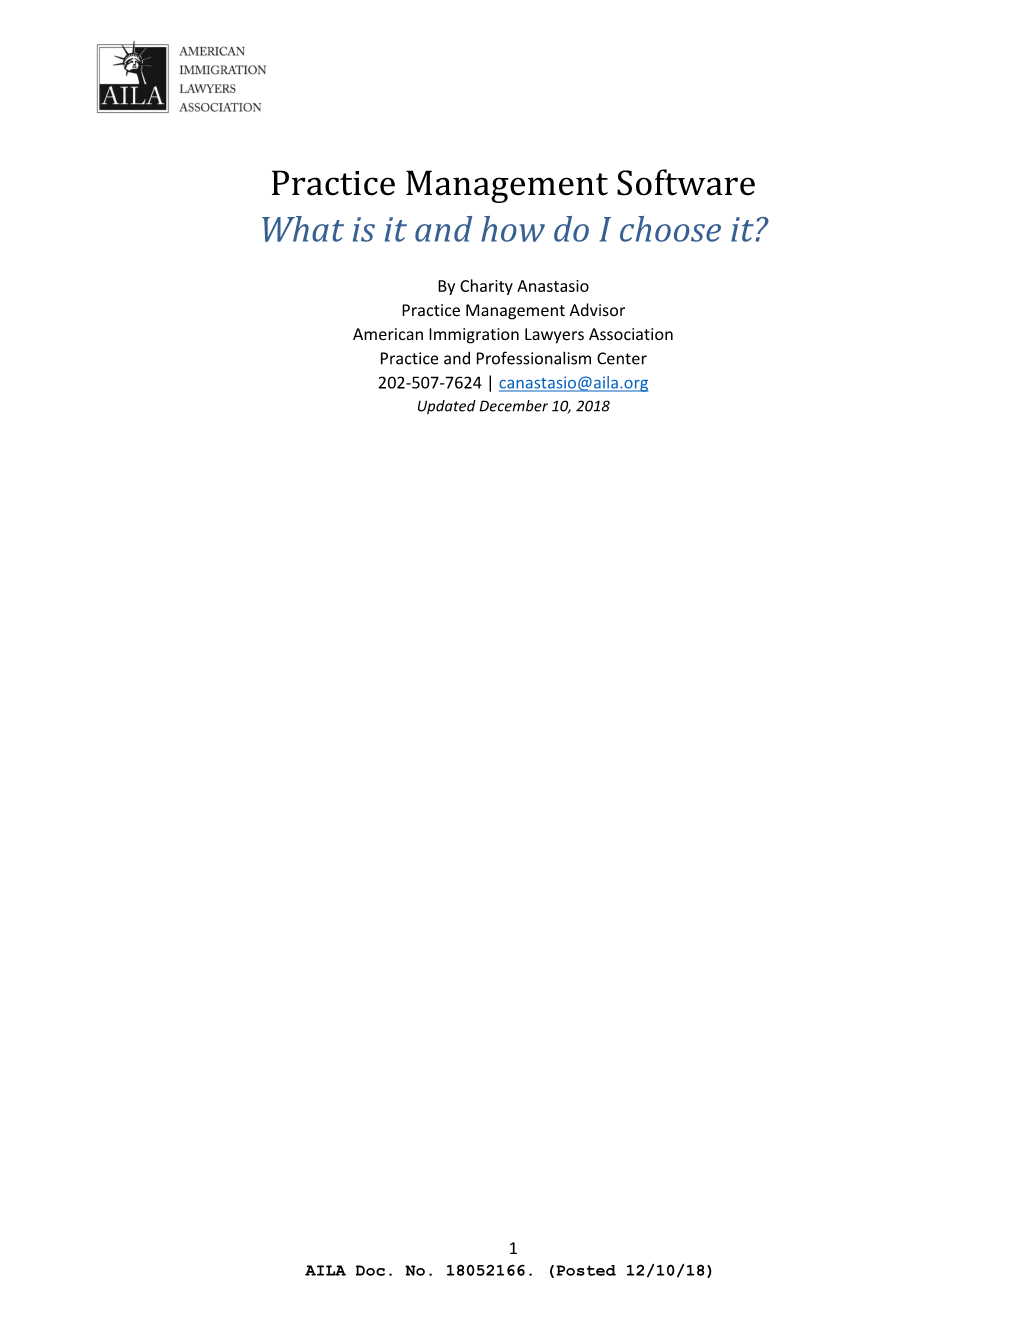 Practice Management Software What Is It and How Do I Choose